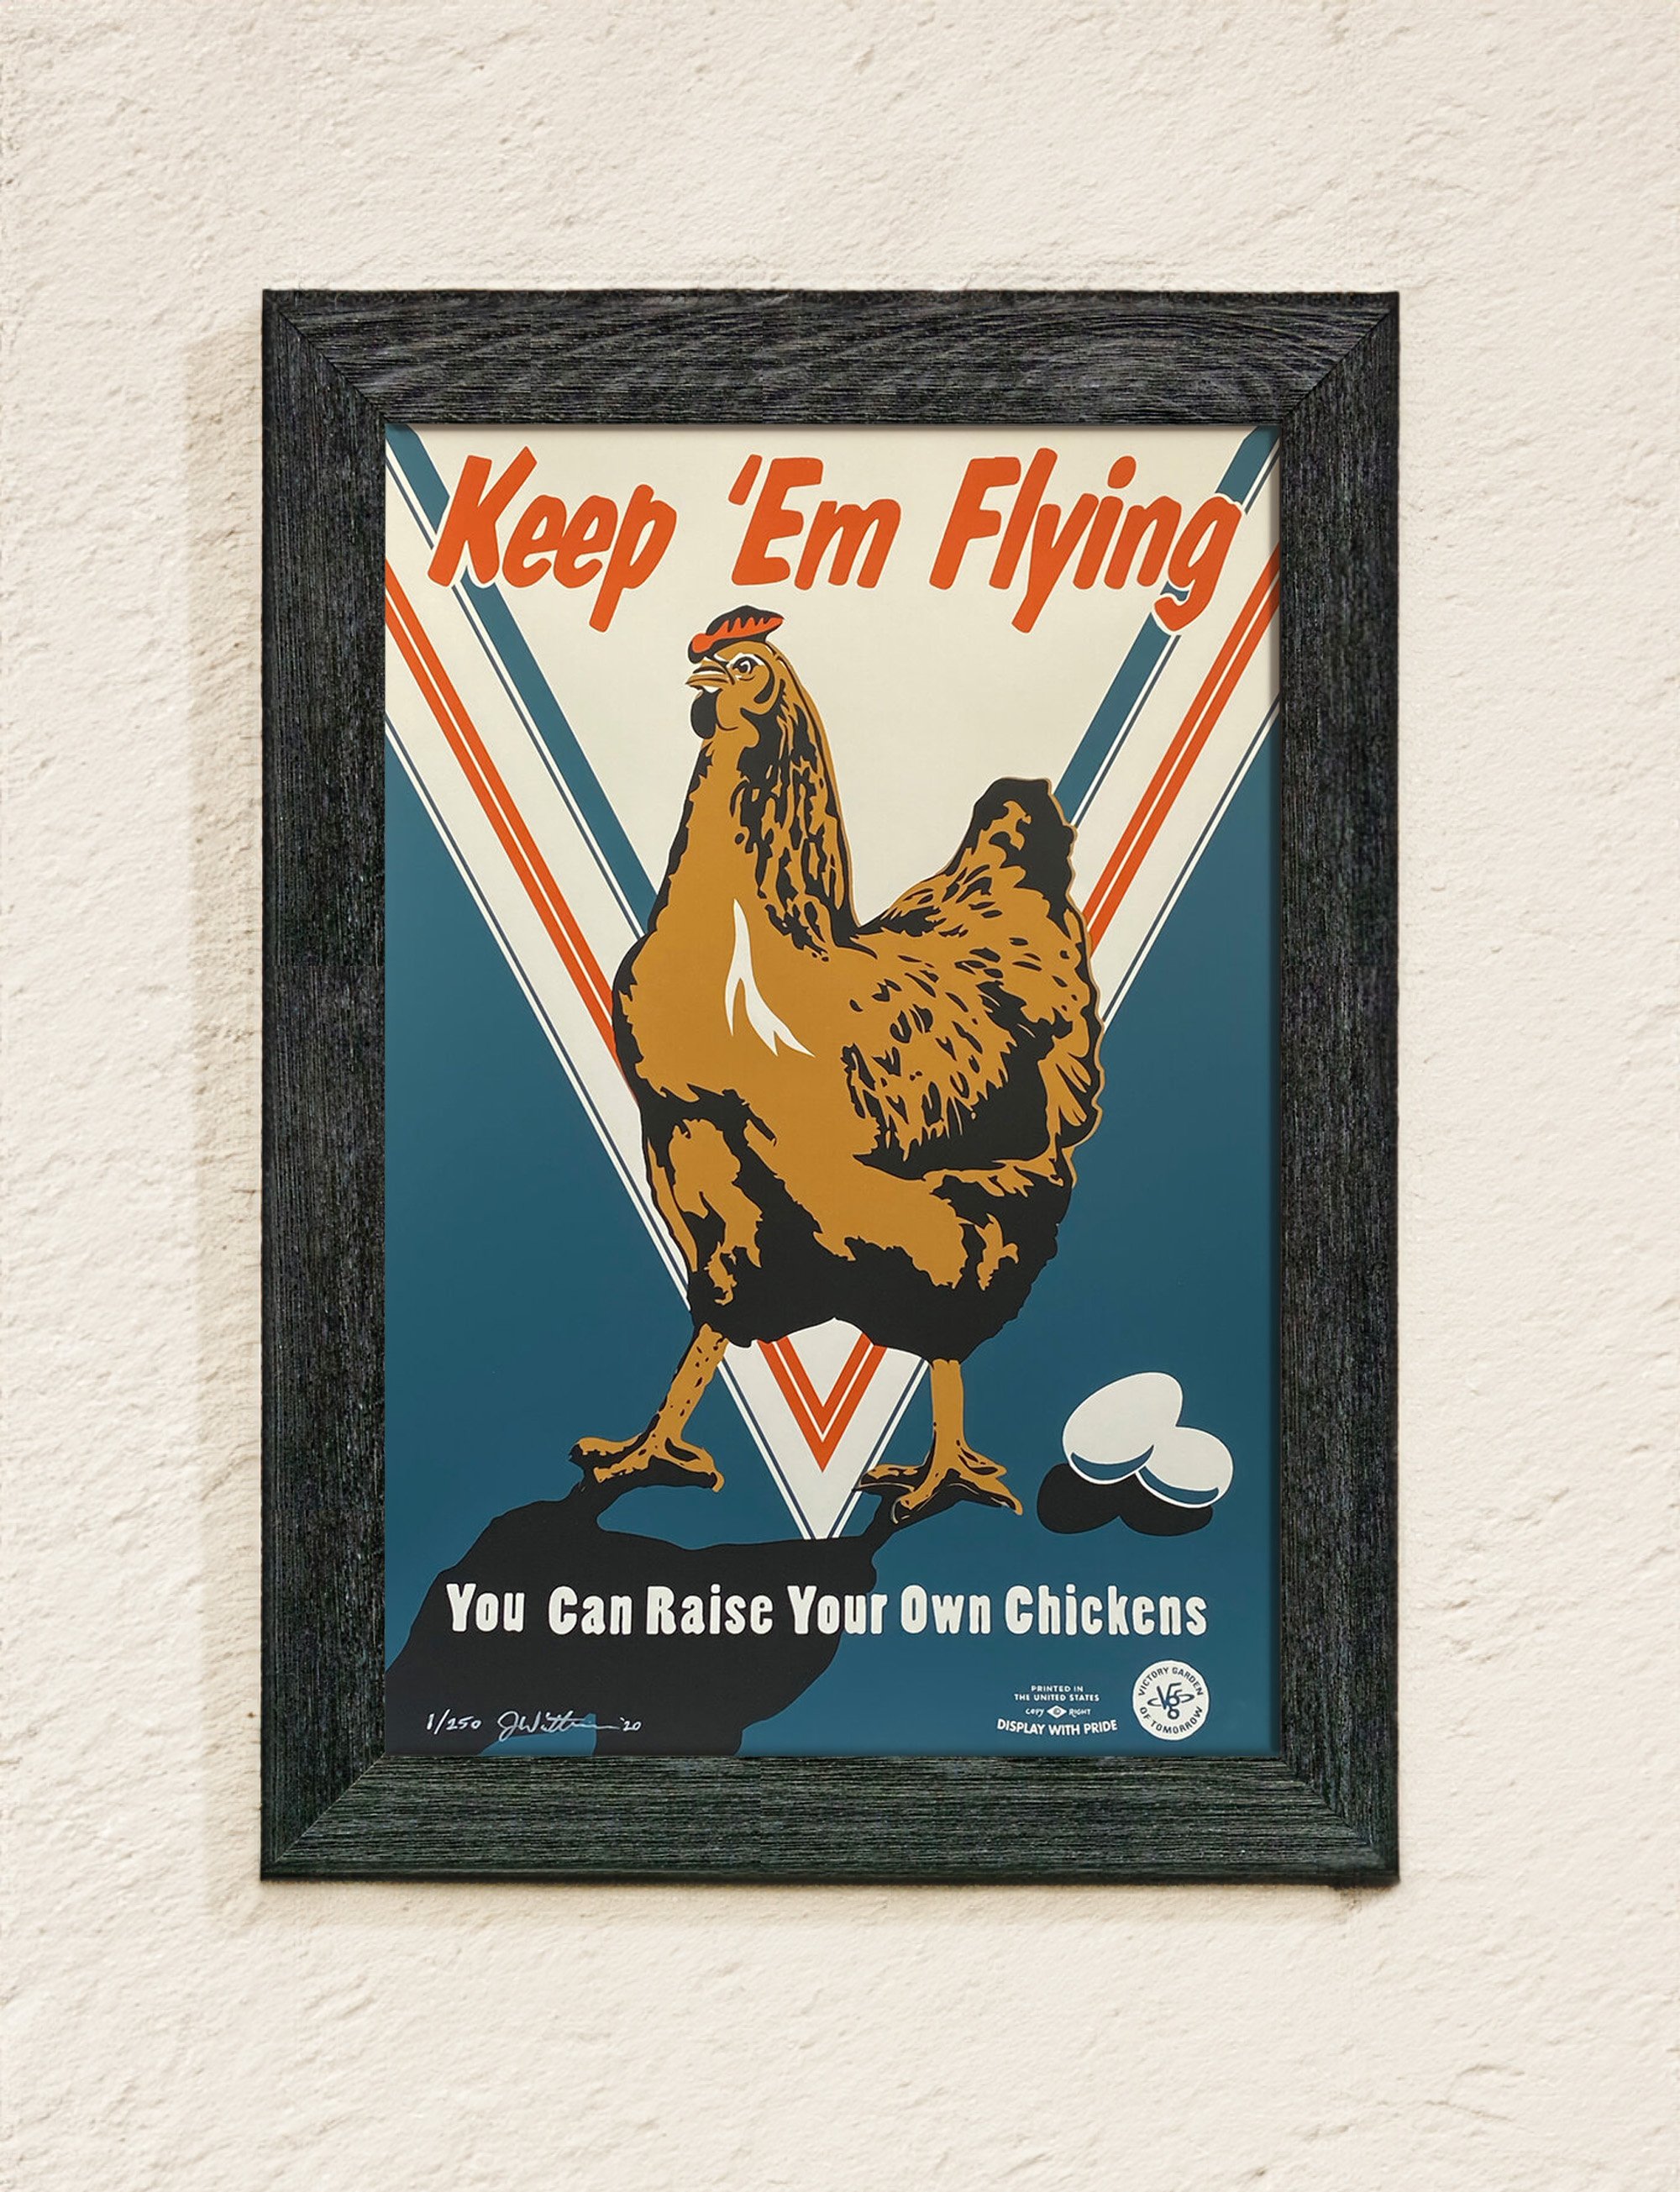 Keep Em Flying 12x18 Screenprint Poster The Victory Garden Of